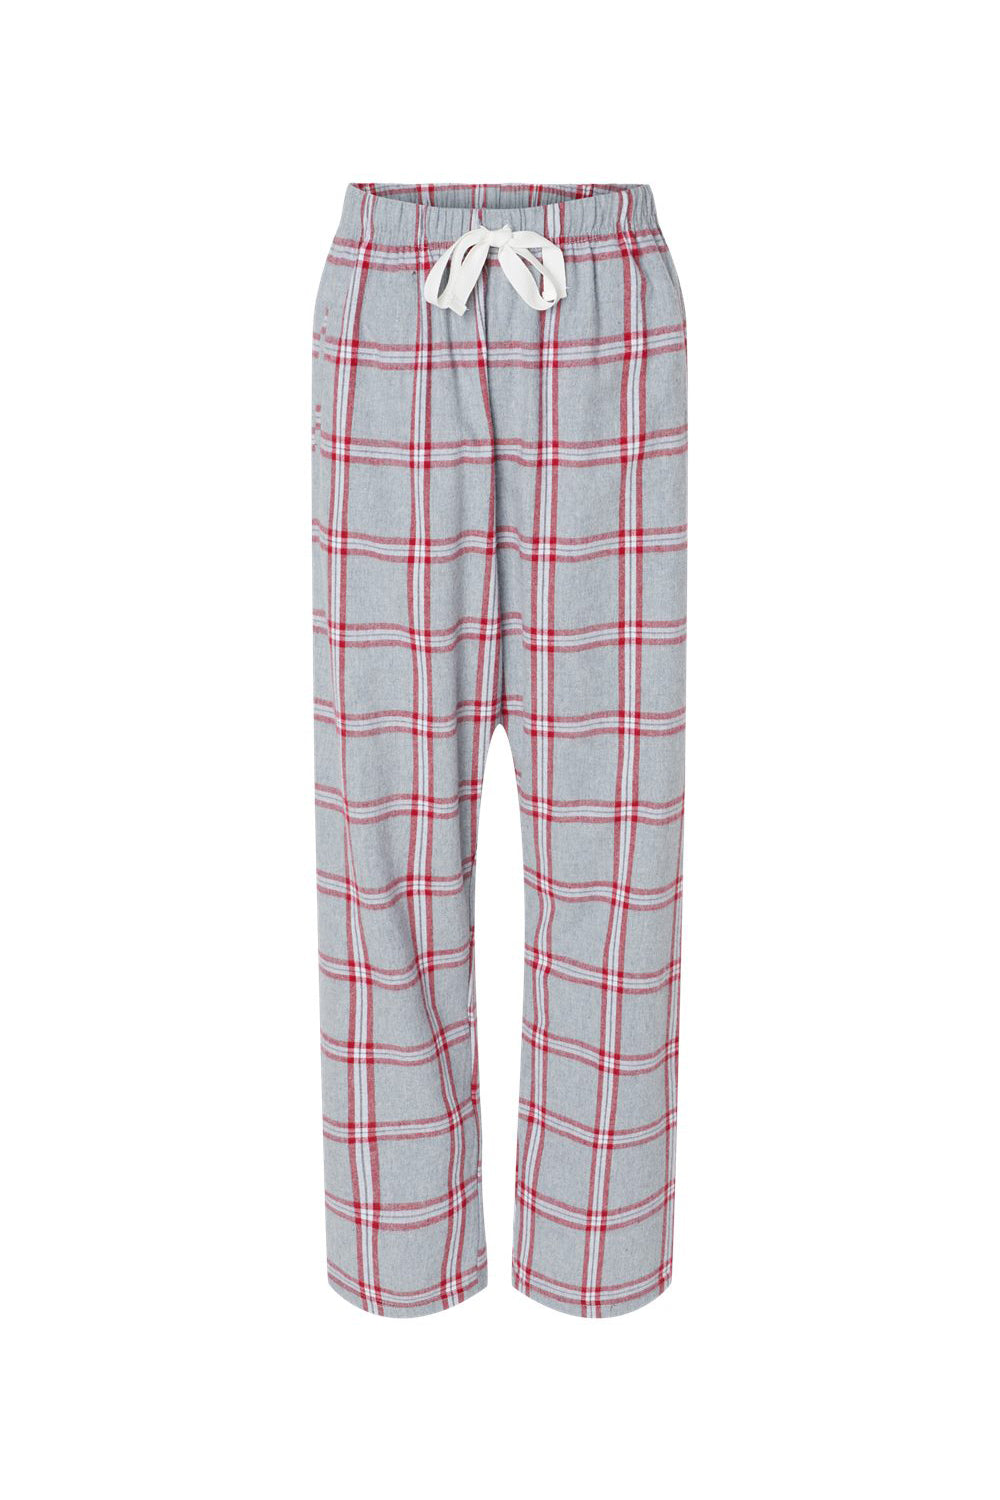 Boxercraft BW6620 Womens Haley Flannel Pants Oxford Red Tomboy Plaid Flat Front